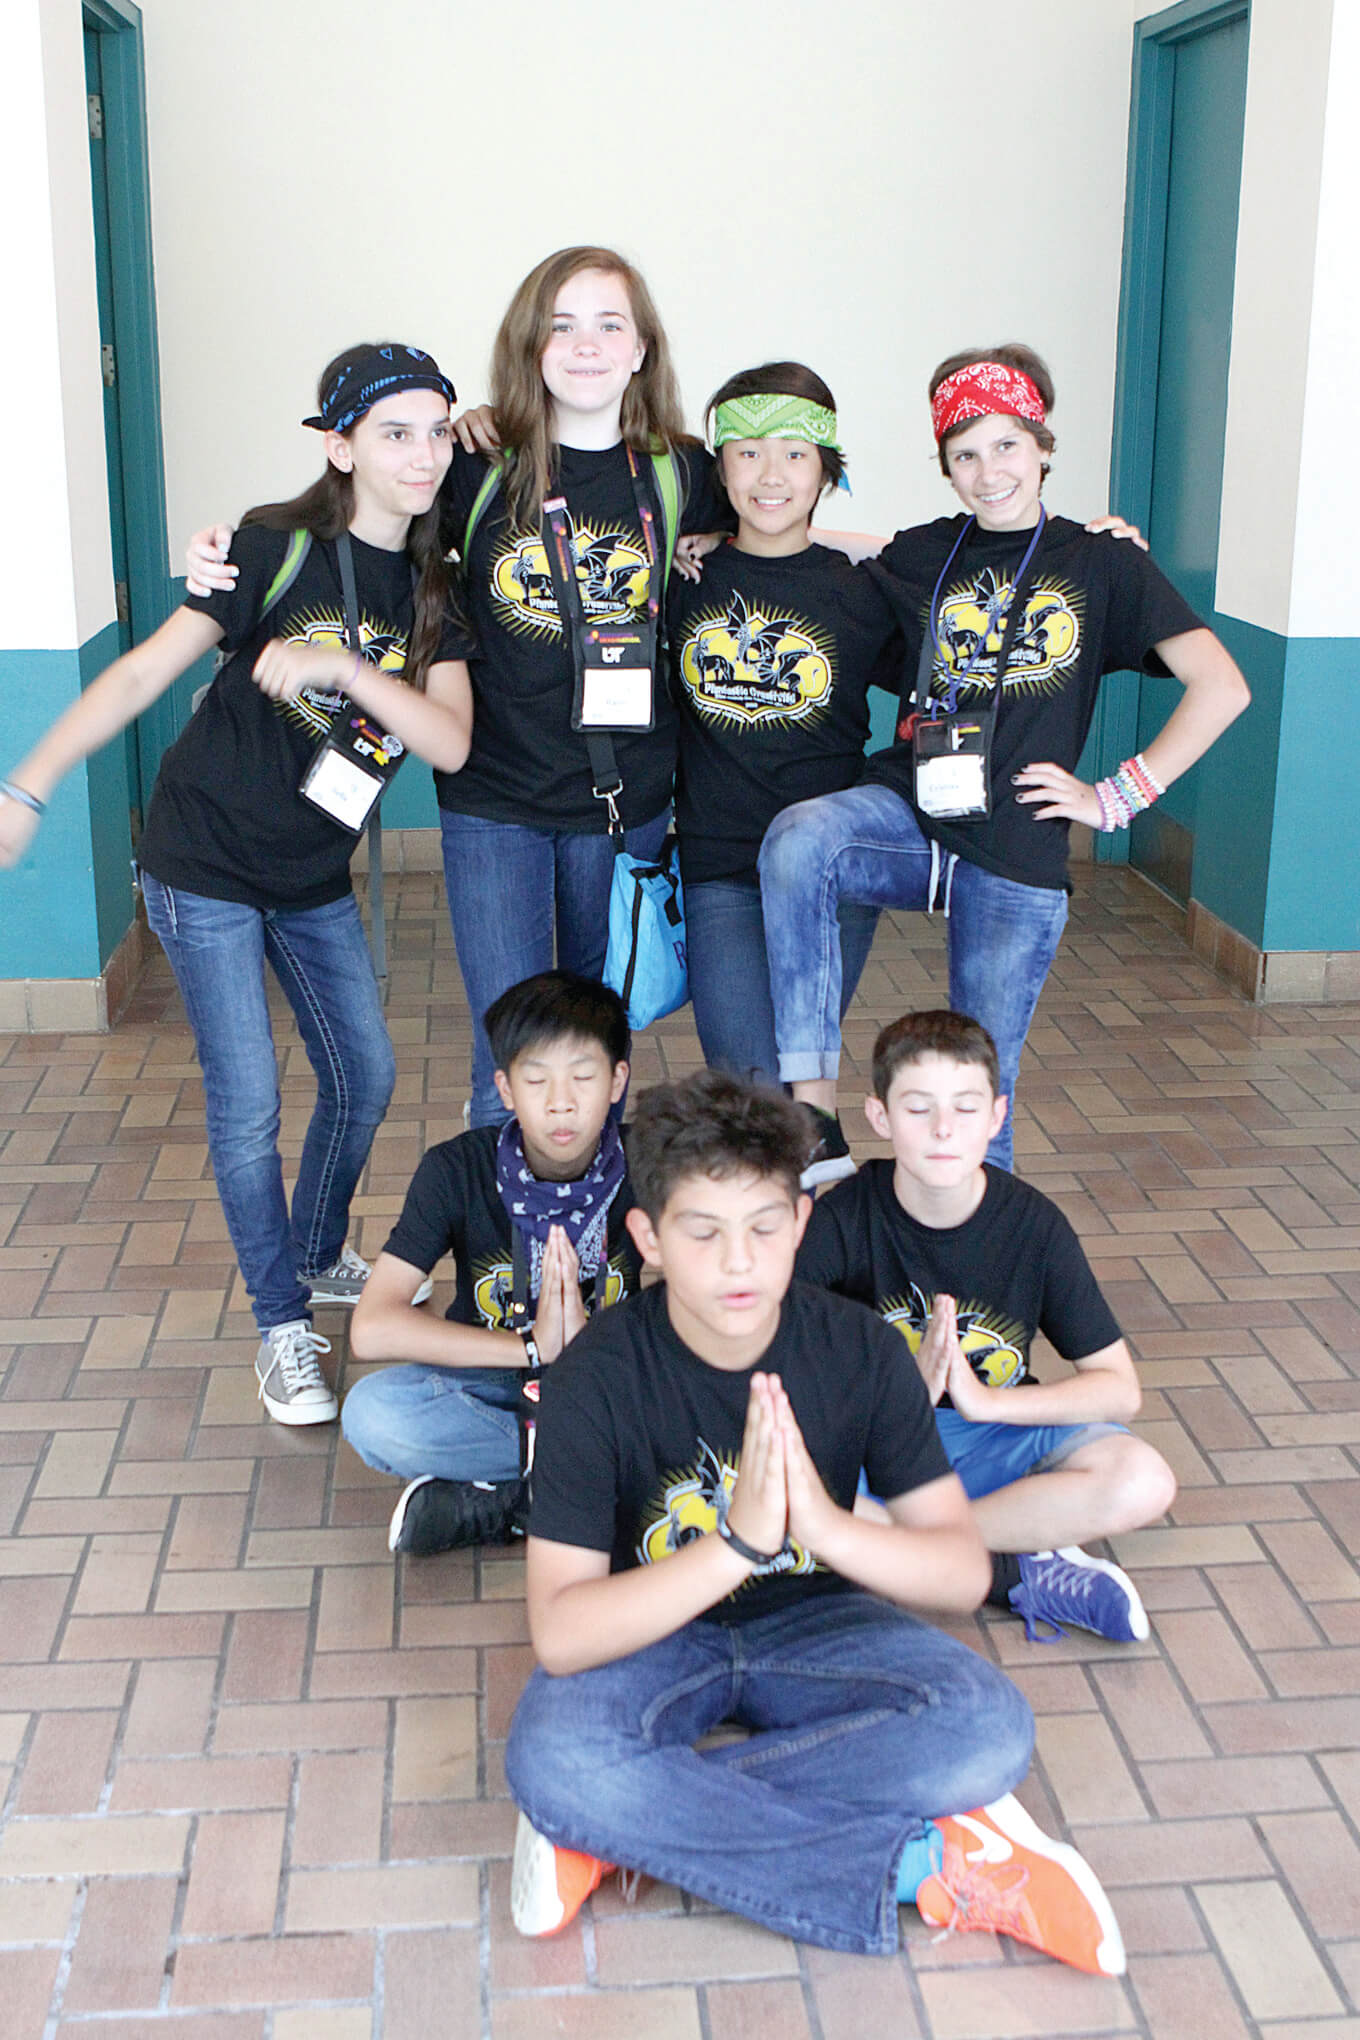 The Canyon Ridge Middle School Destination Imagination team earned 25th place at Globals. The CRMS team, Heptamojis, included Alexander Rapier, Jack McCarty, Raine Collier, Bella Riedl, Eric Chan, Kim Tan and Cristina Spellings. The team was managed by Martha Montemayor-Rapier and Edward Rapier.